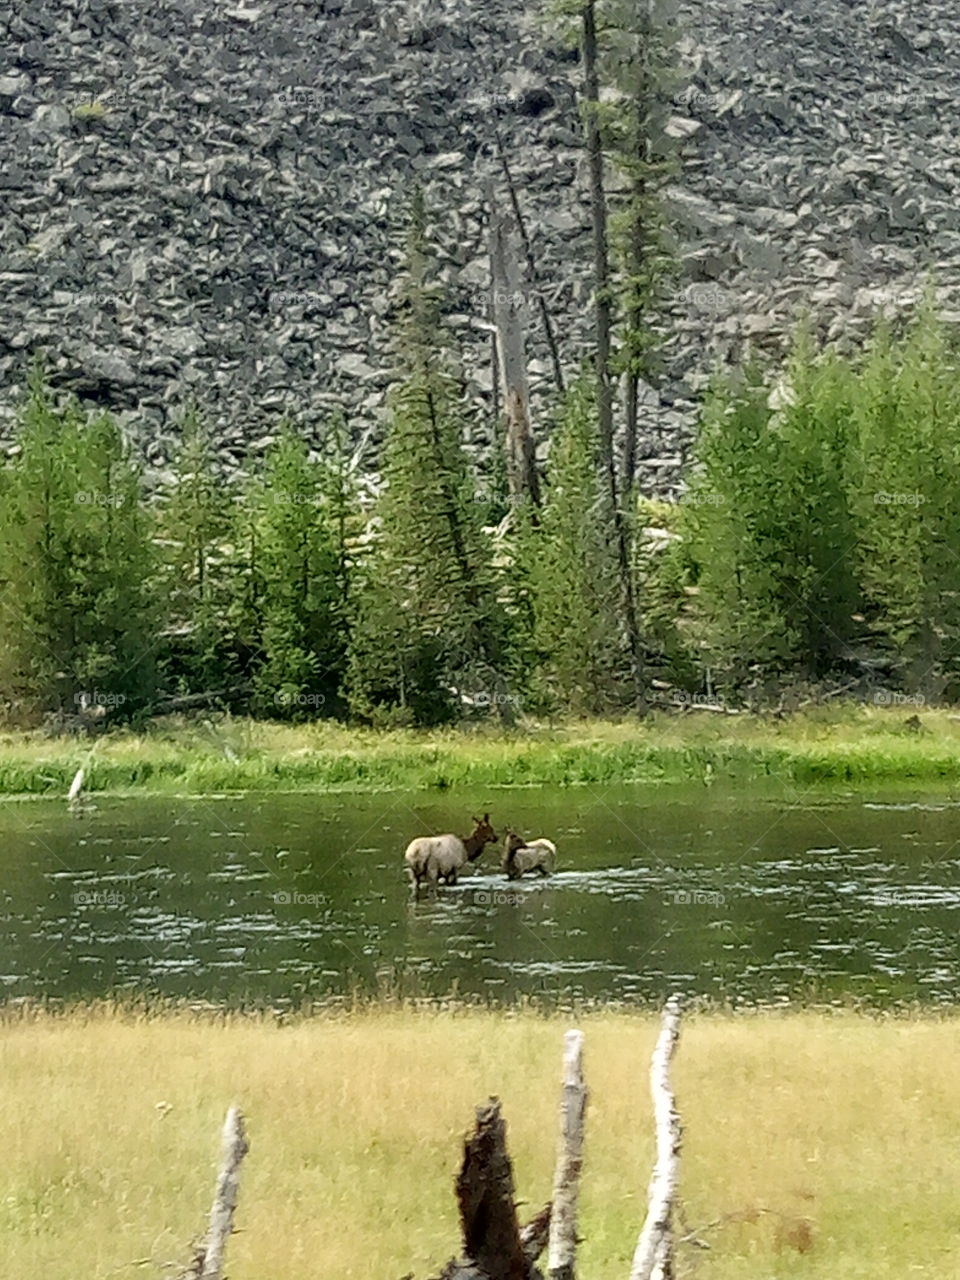 Yellowstone mother and baby deer